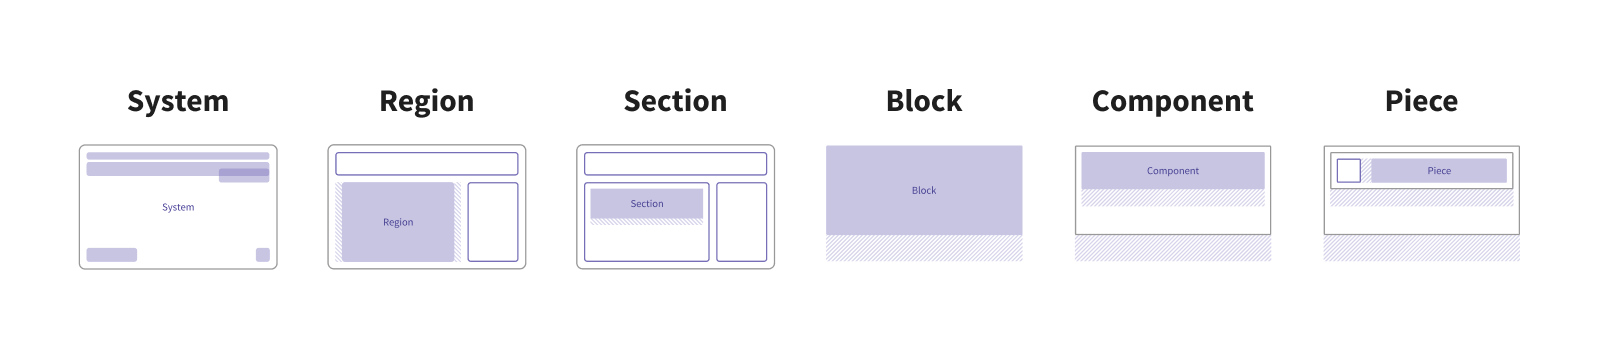 Visual examples of the six layers of the system: systems, regions, sections, blocks, components, and pieces.